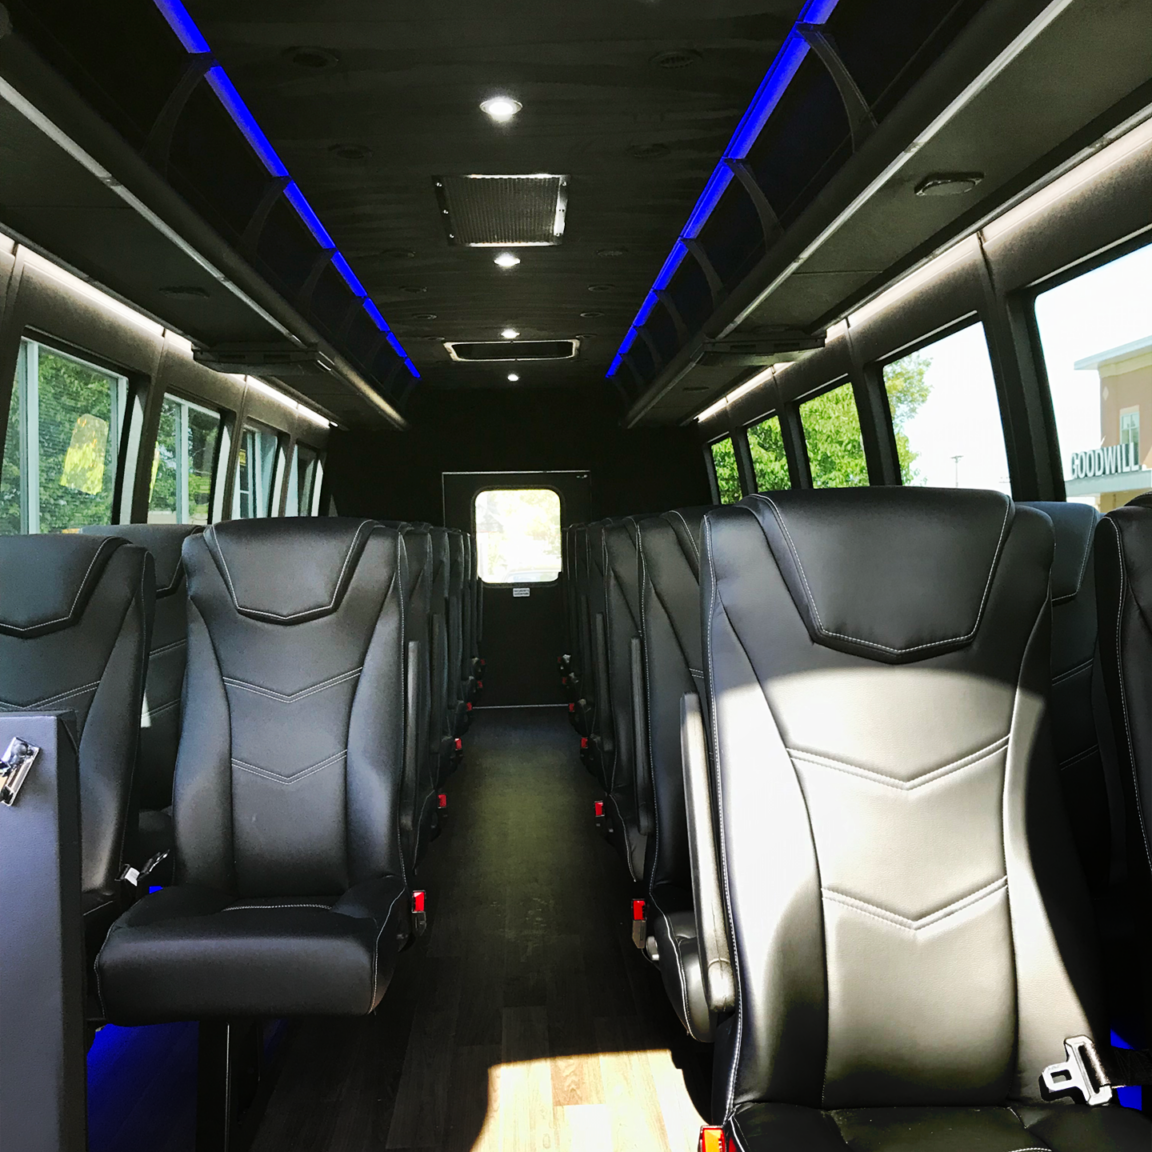 Luxury bus interior for large tour groups